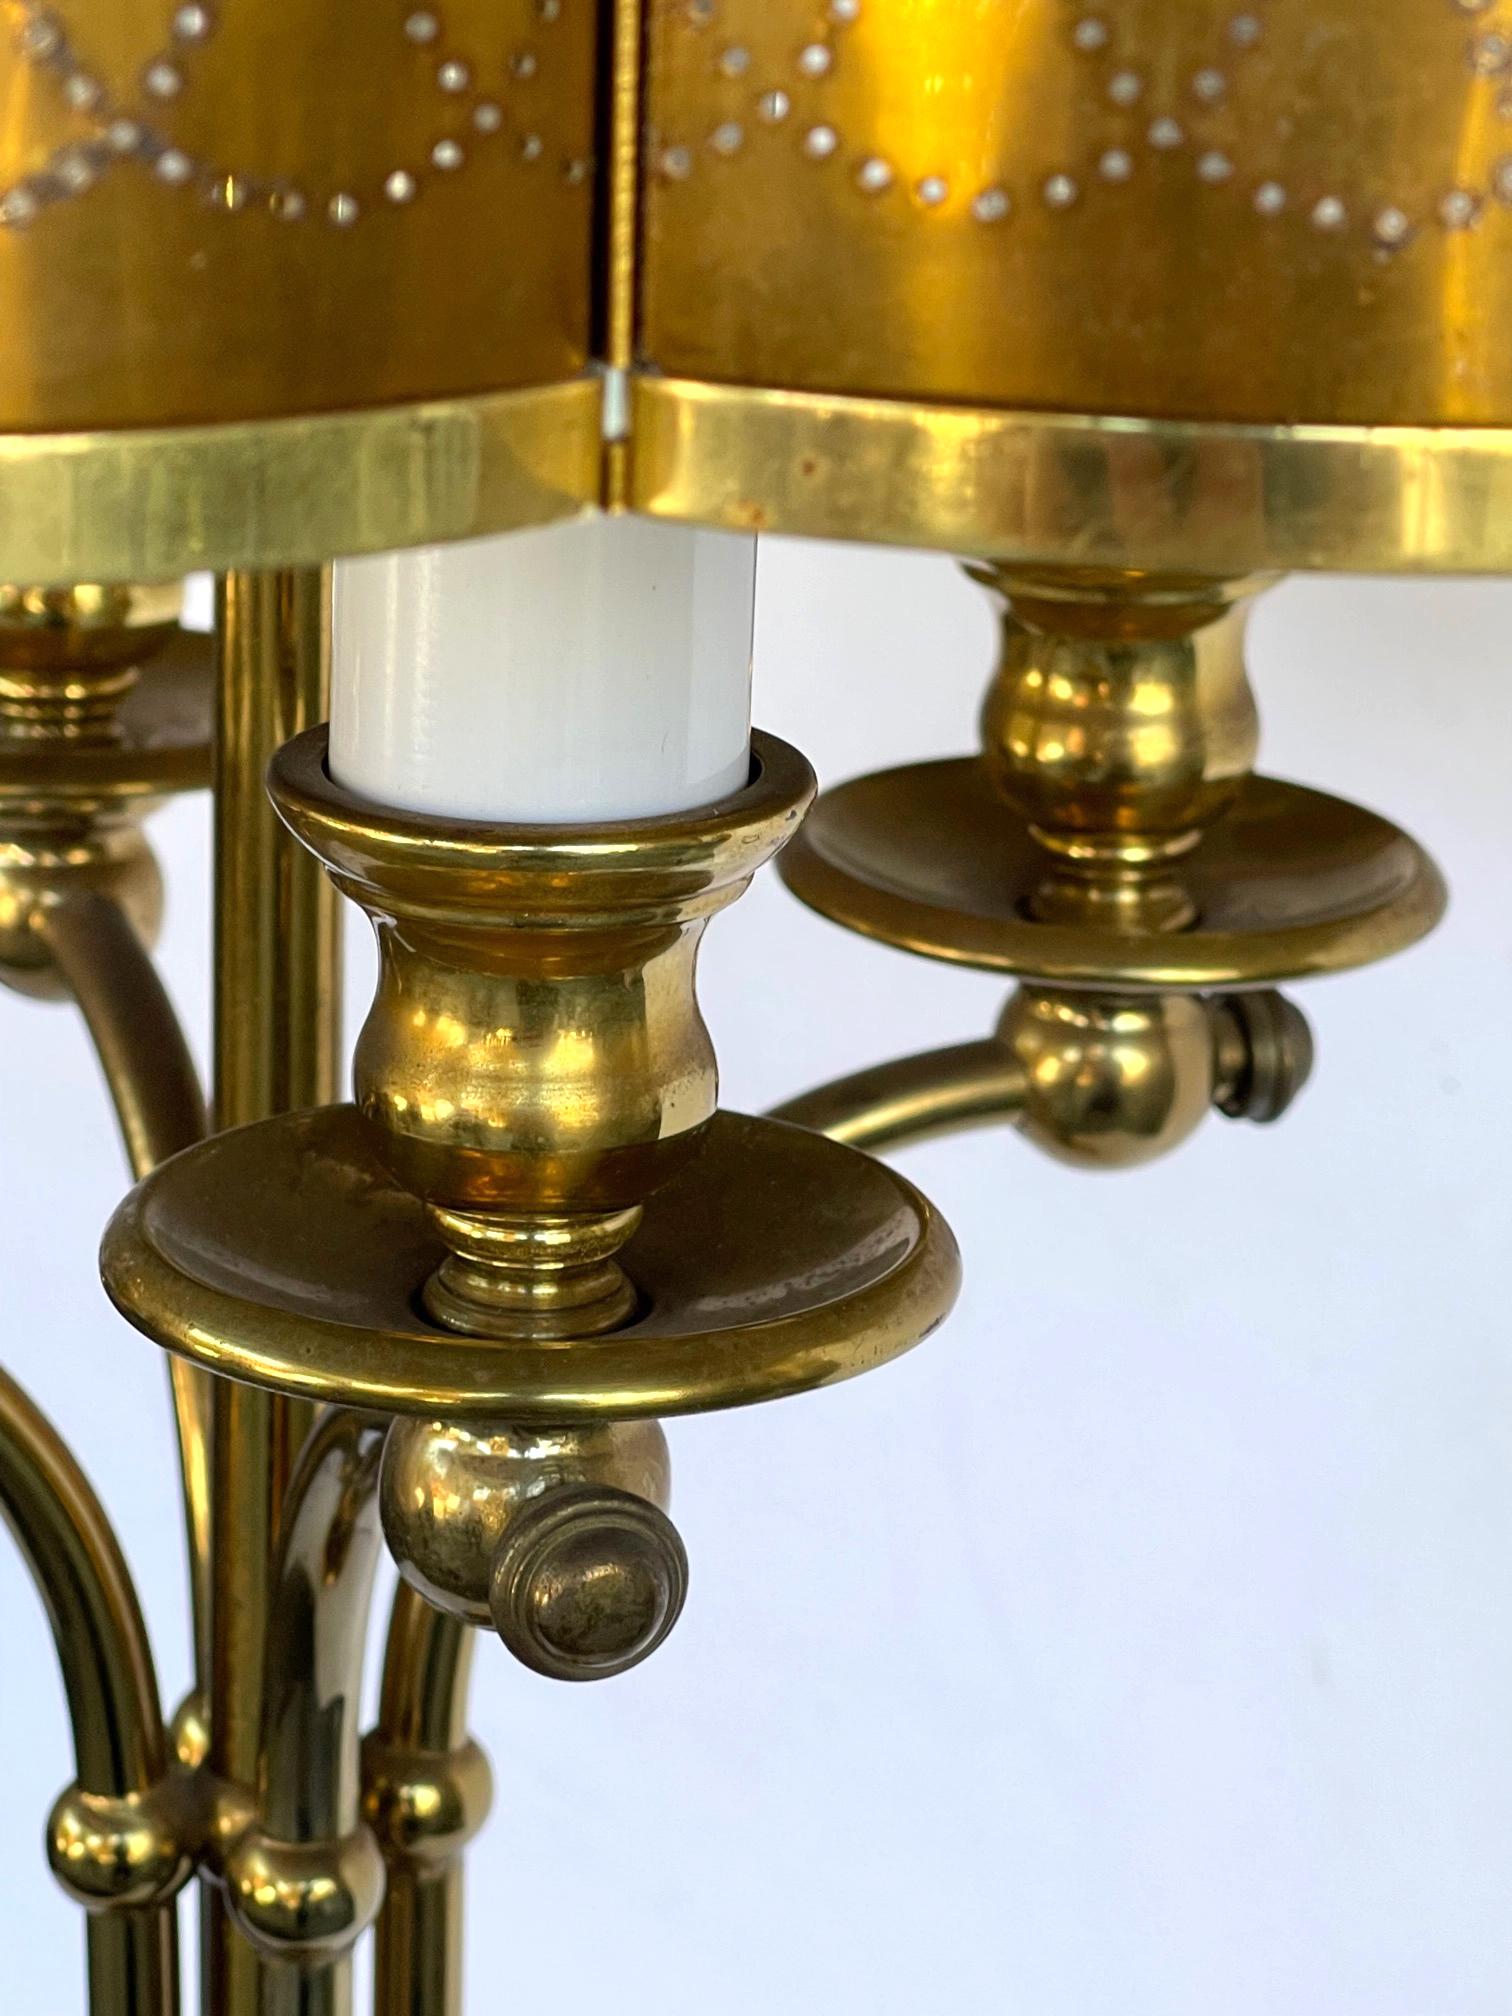 each out-scrolled candle arm emanating from a vasi-form base; fitted with the original scalloped brass shade with pierced decoration